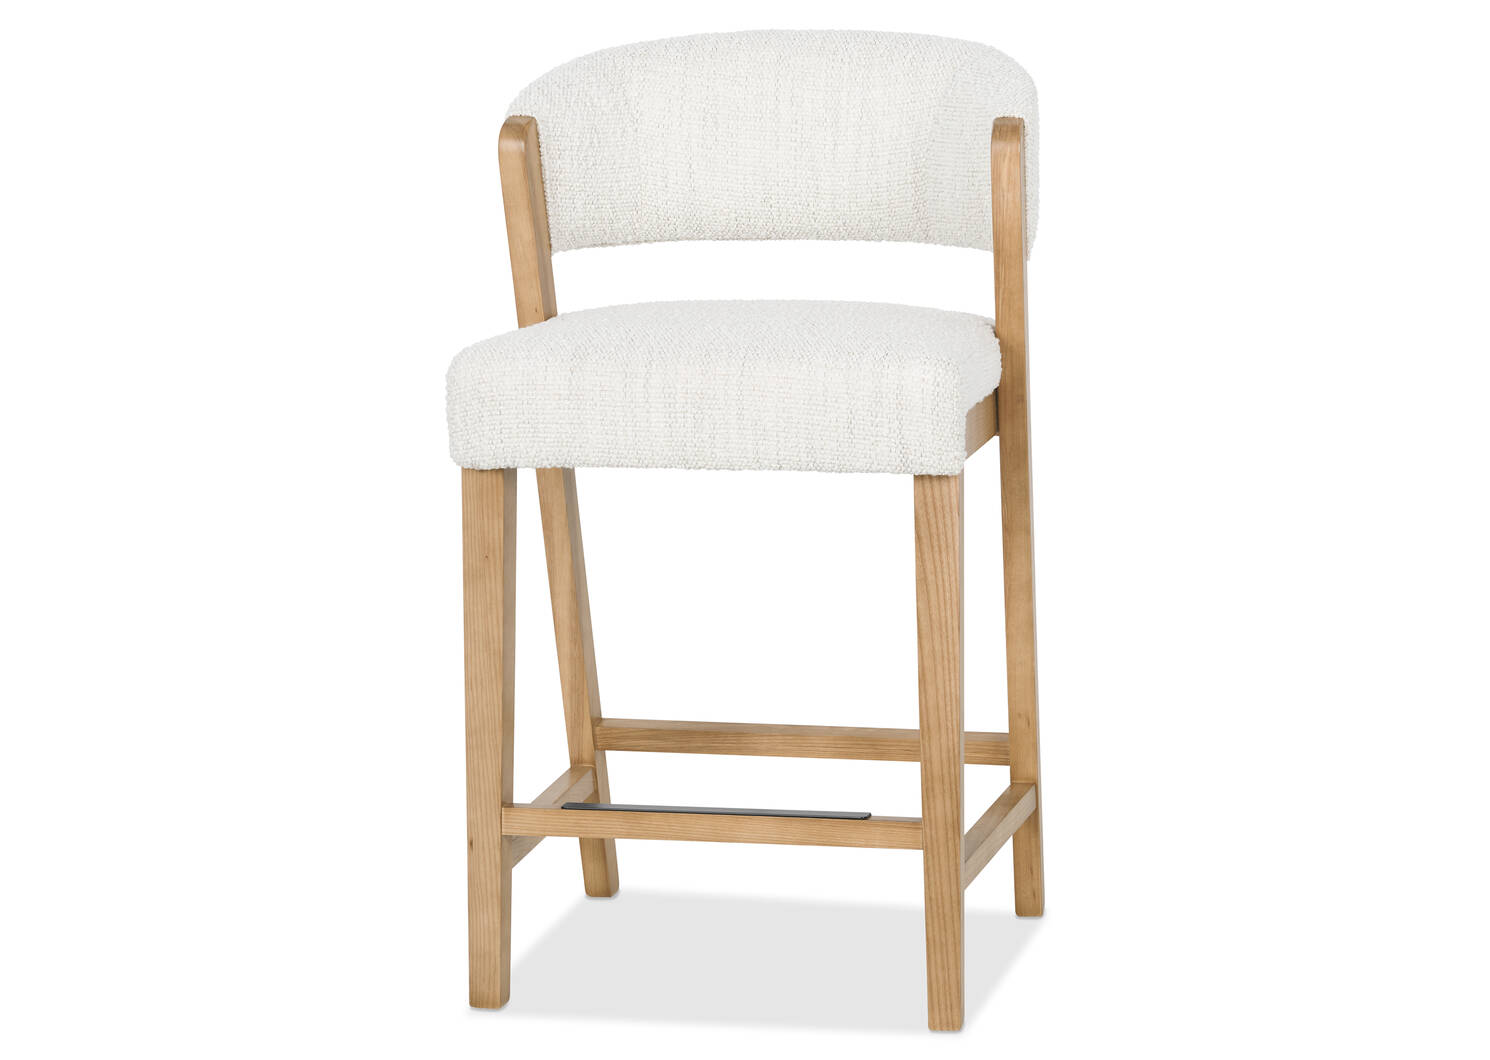 Willaby Counter Stool -Luly Ivory